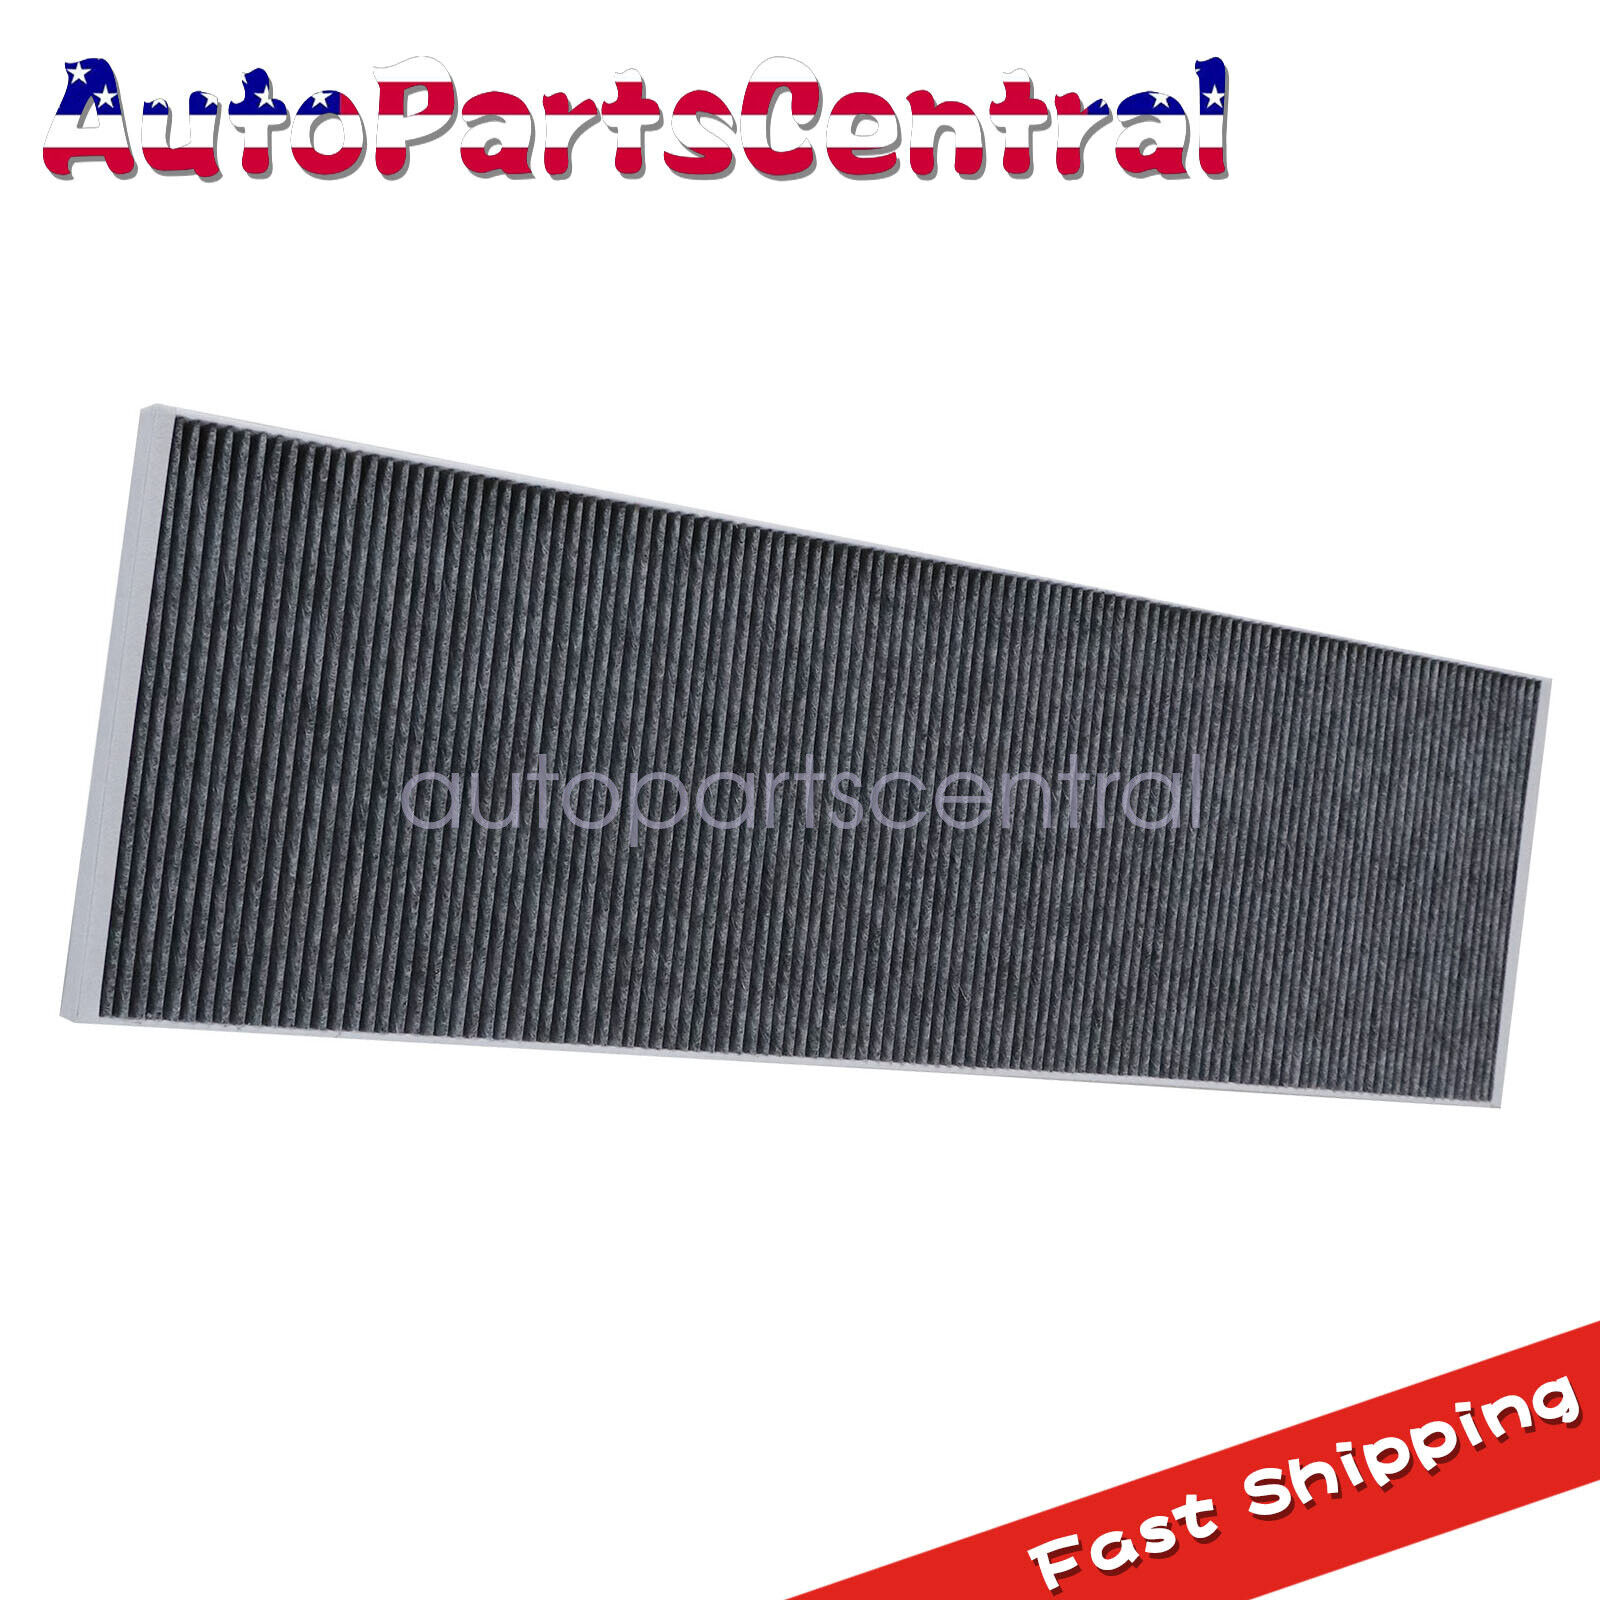 New For 2016-2020 Tesla Model X HEPA Front Air Filter 1045566-00-H